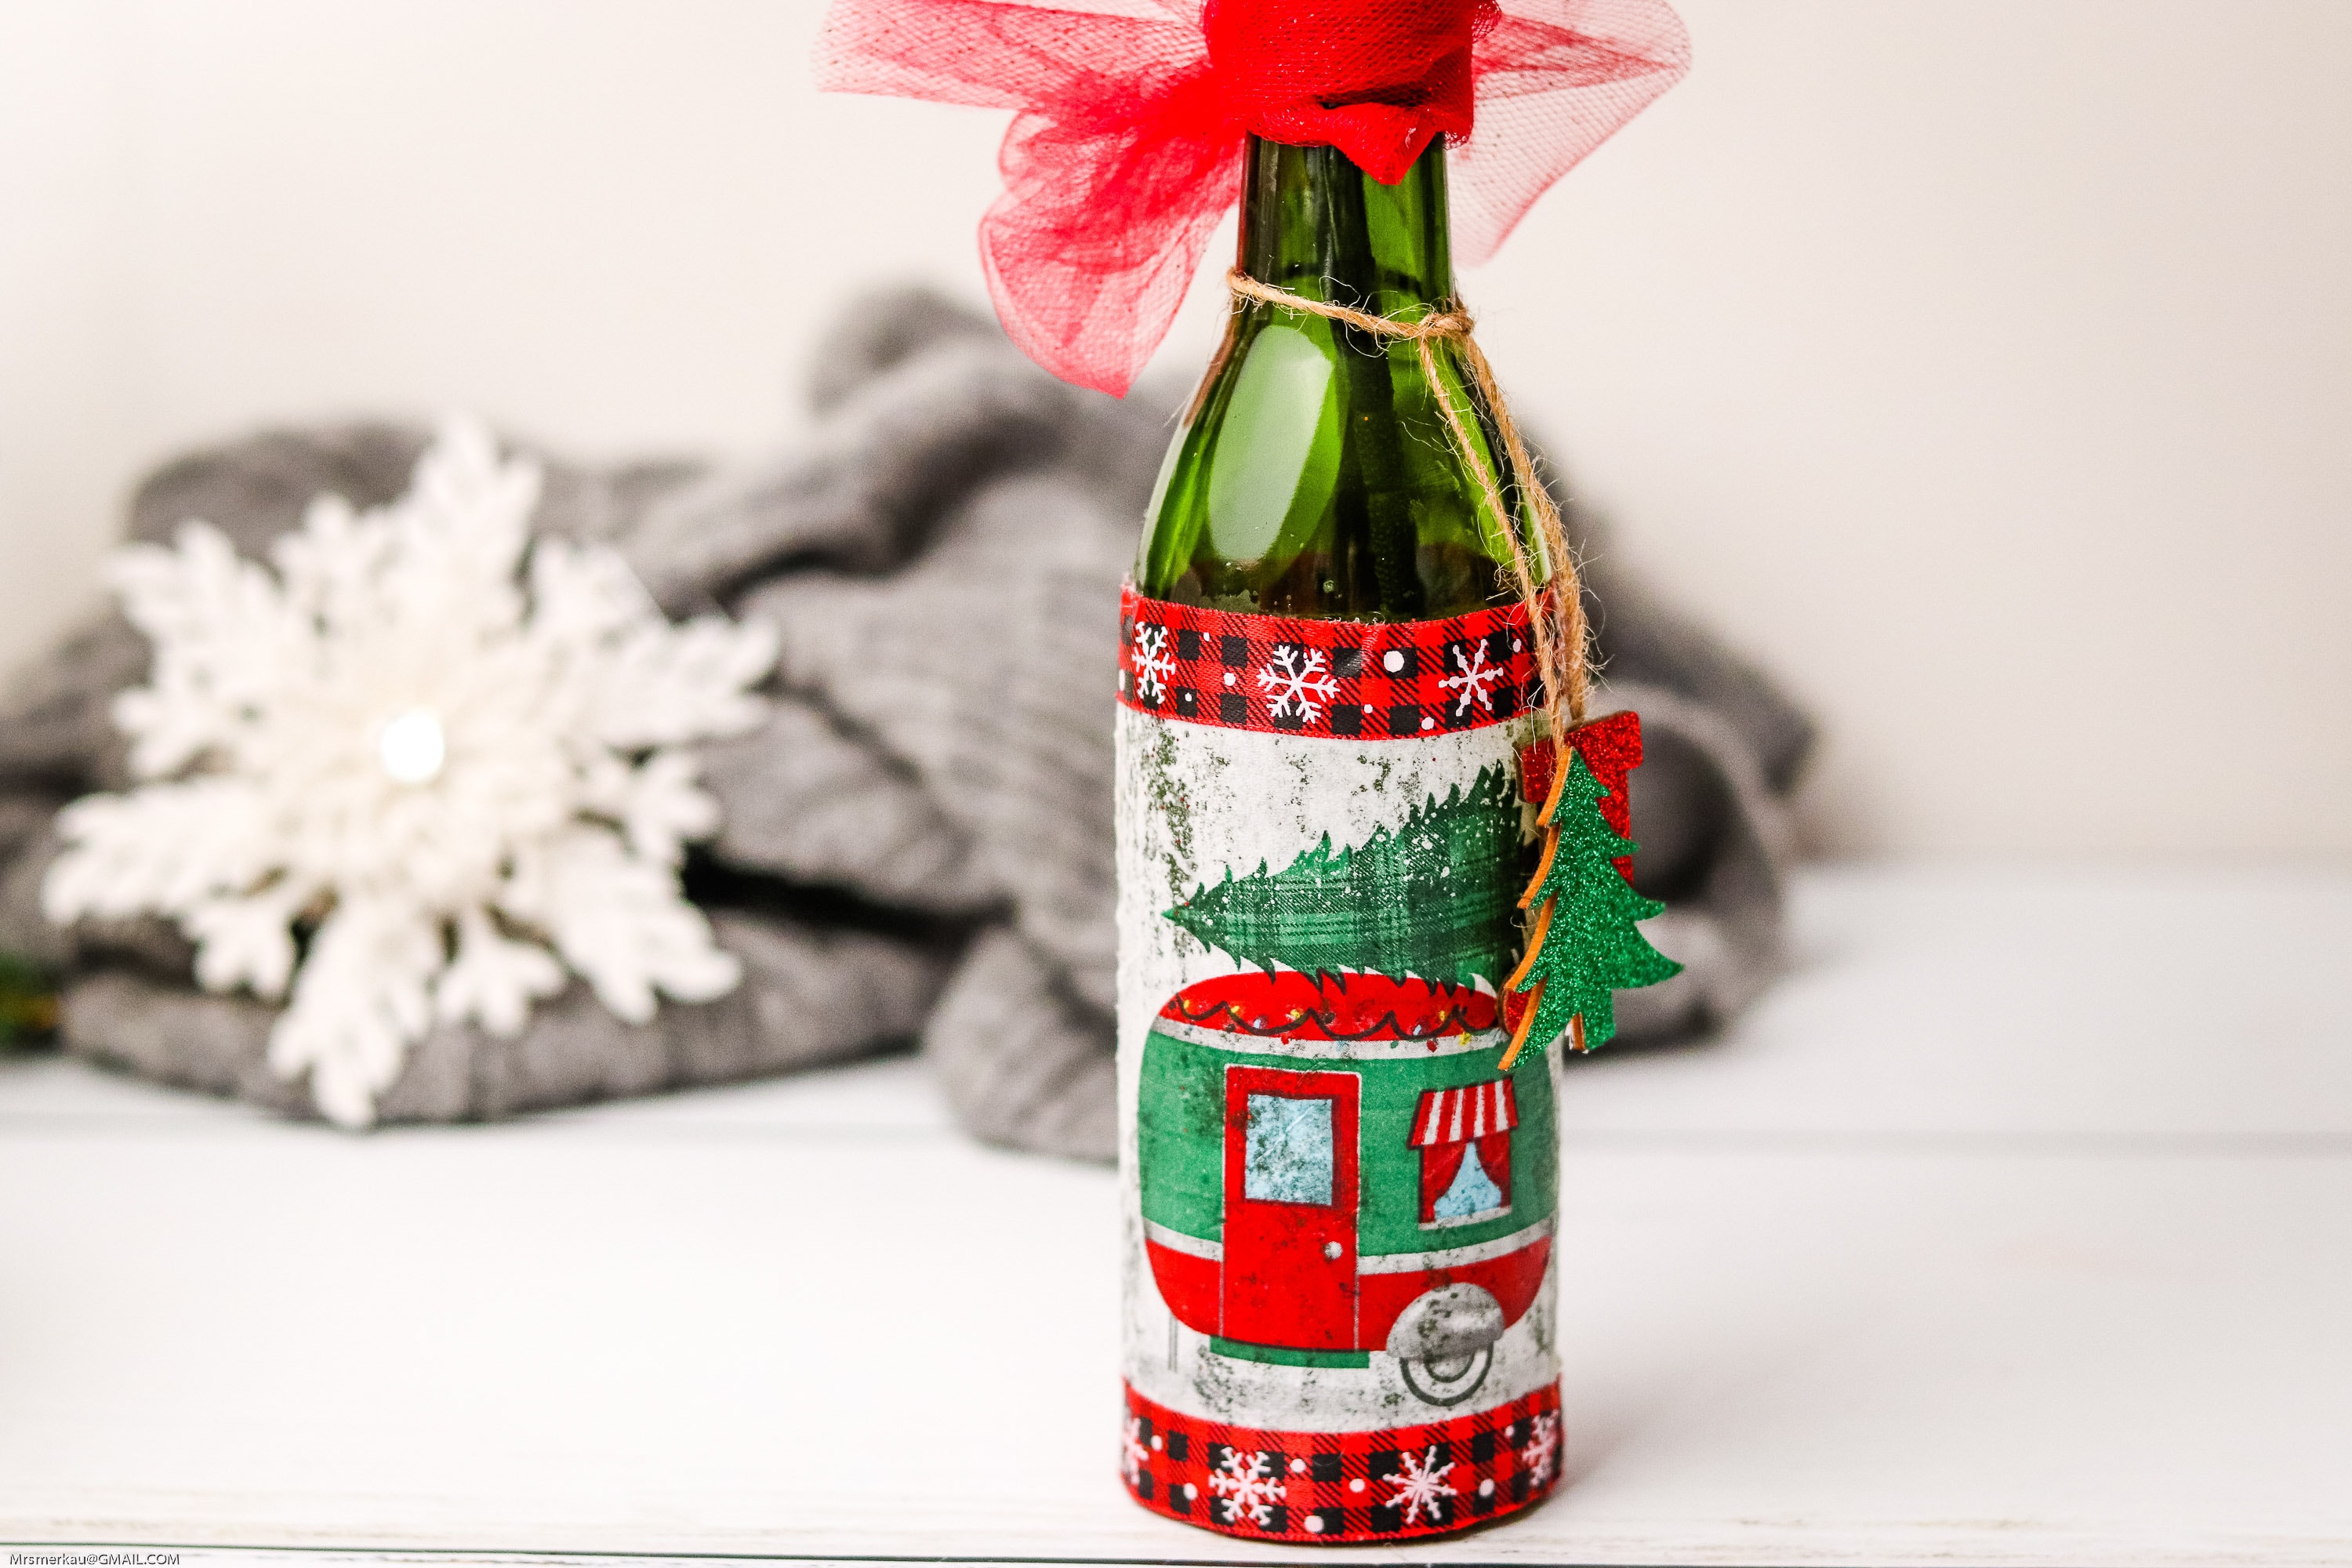 This Christmas Table DIY centerpiece is super easy to make and great to give as a hostess gift! This craft uses simple materials you likely have at home!